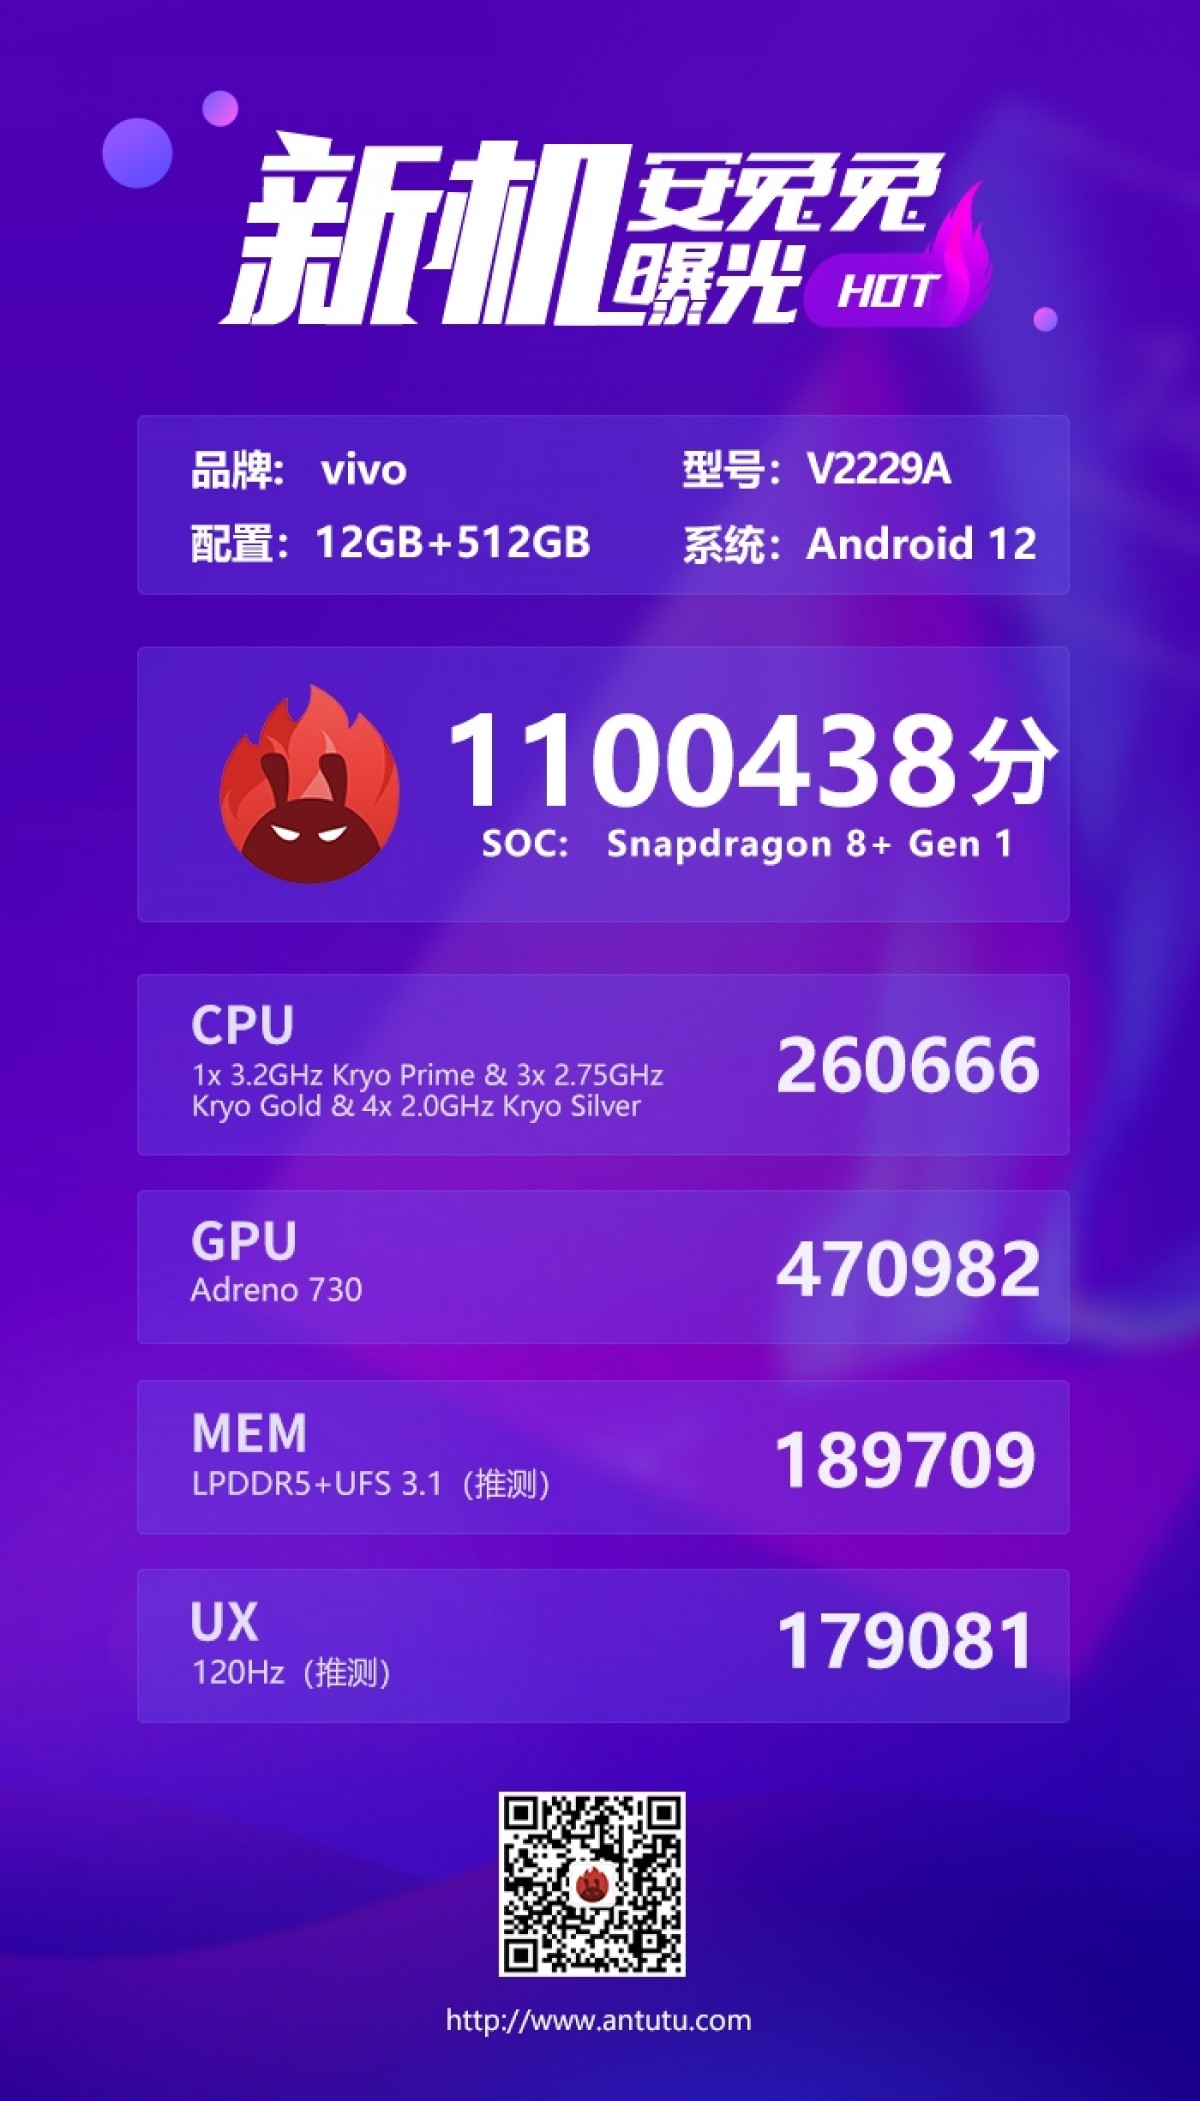 vivo X Fold+ with Snapdragon 8+ Gen 1 appears on AnTuTu